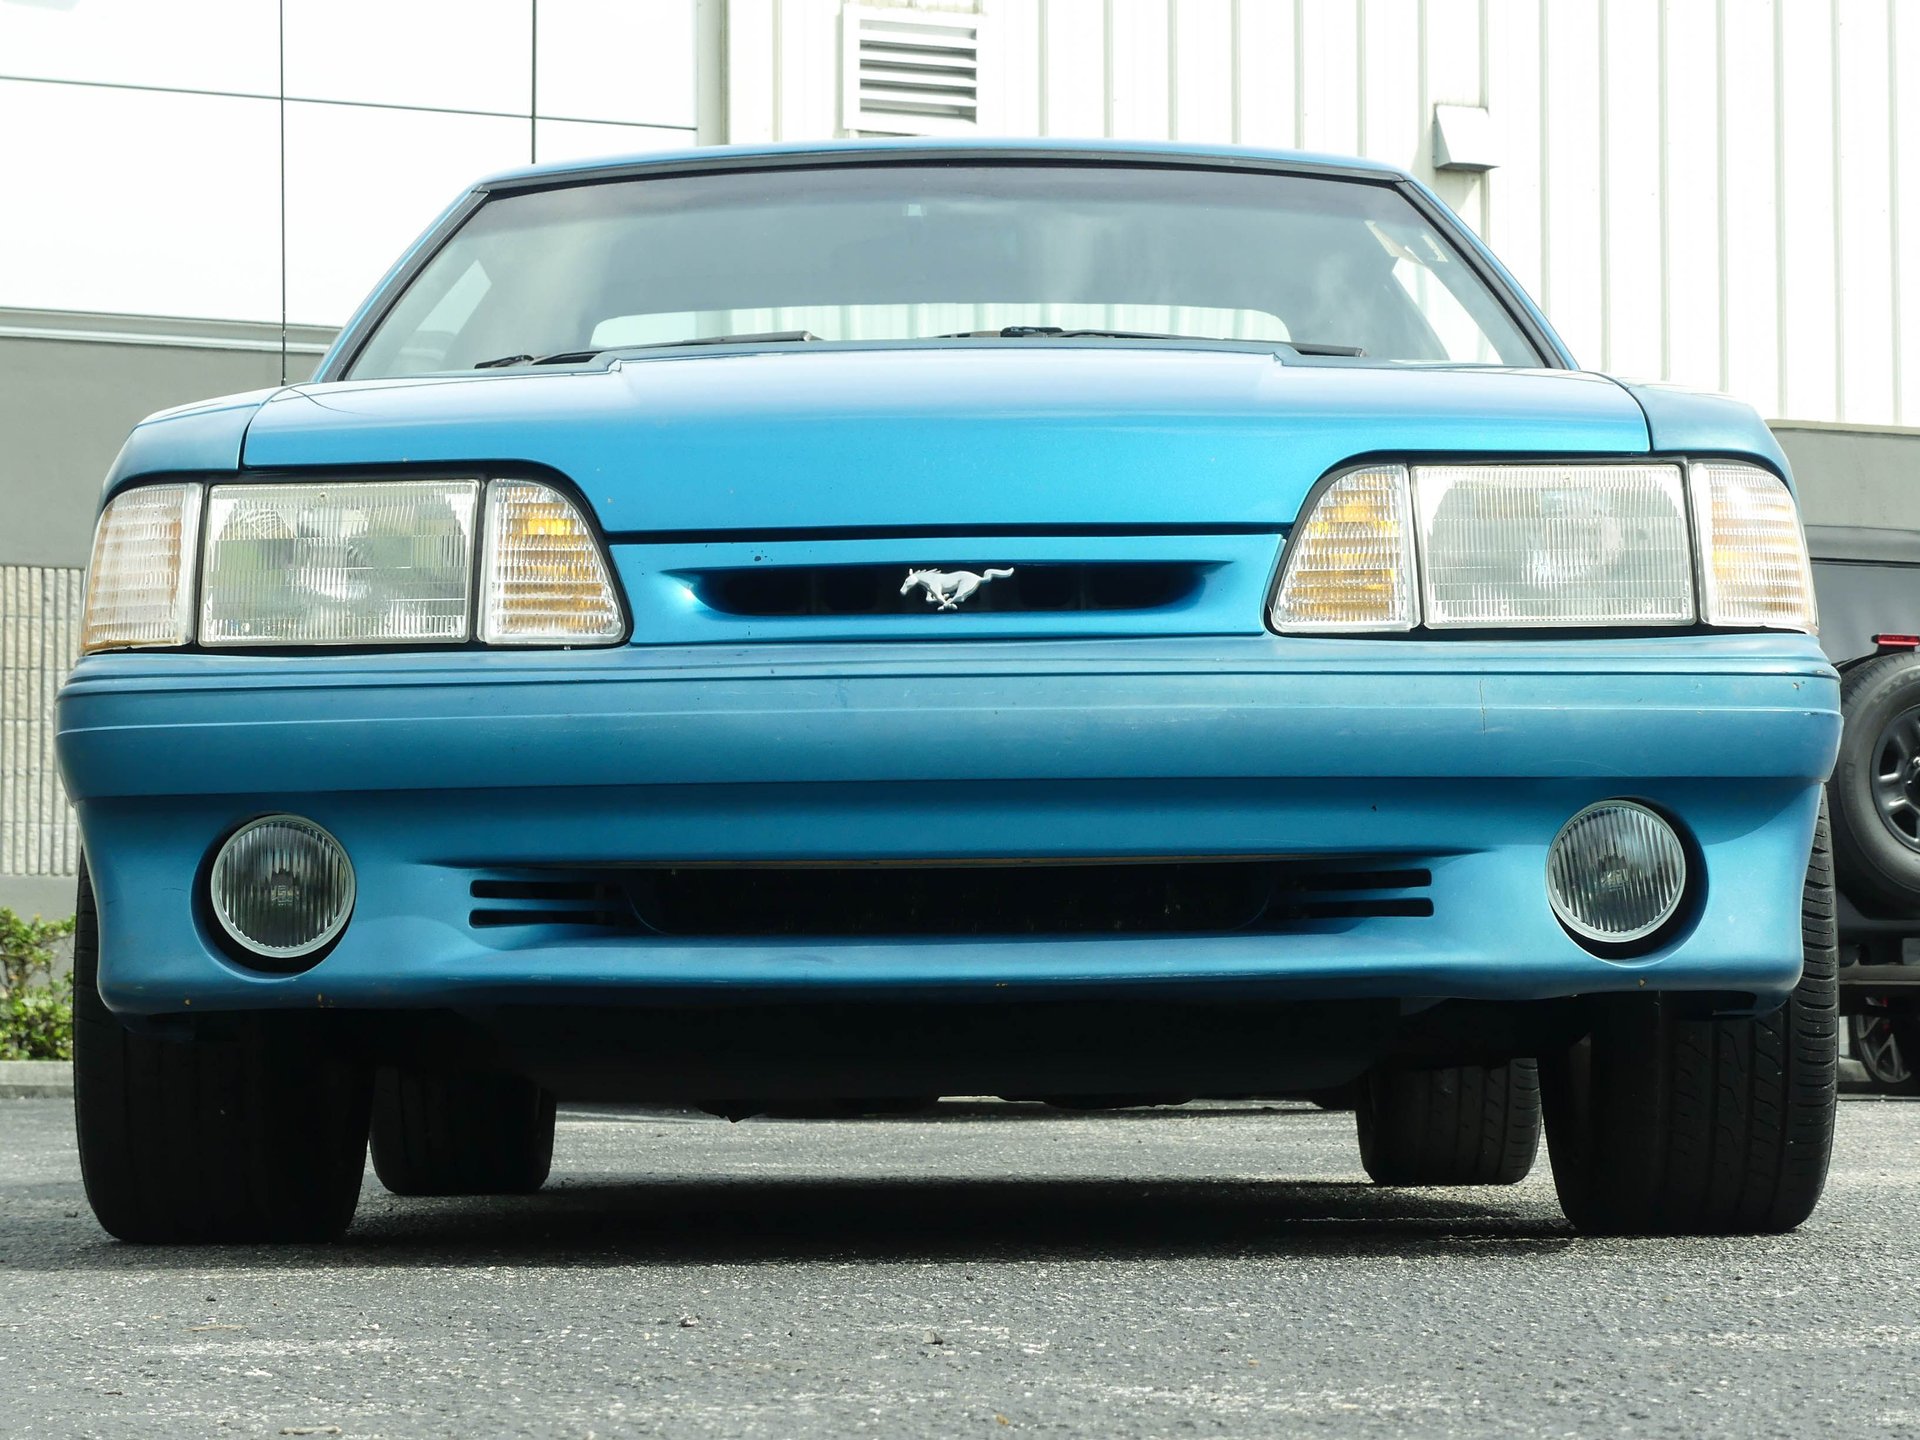 0799-TAMPA | 1993 Ford Mustang Cobra | Survivor Classic Cars Services